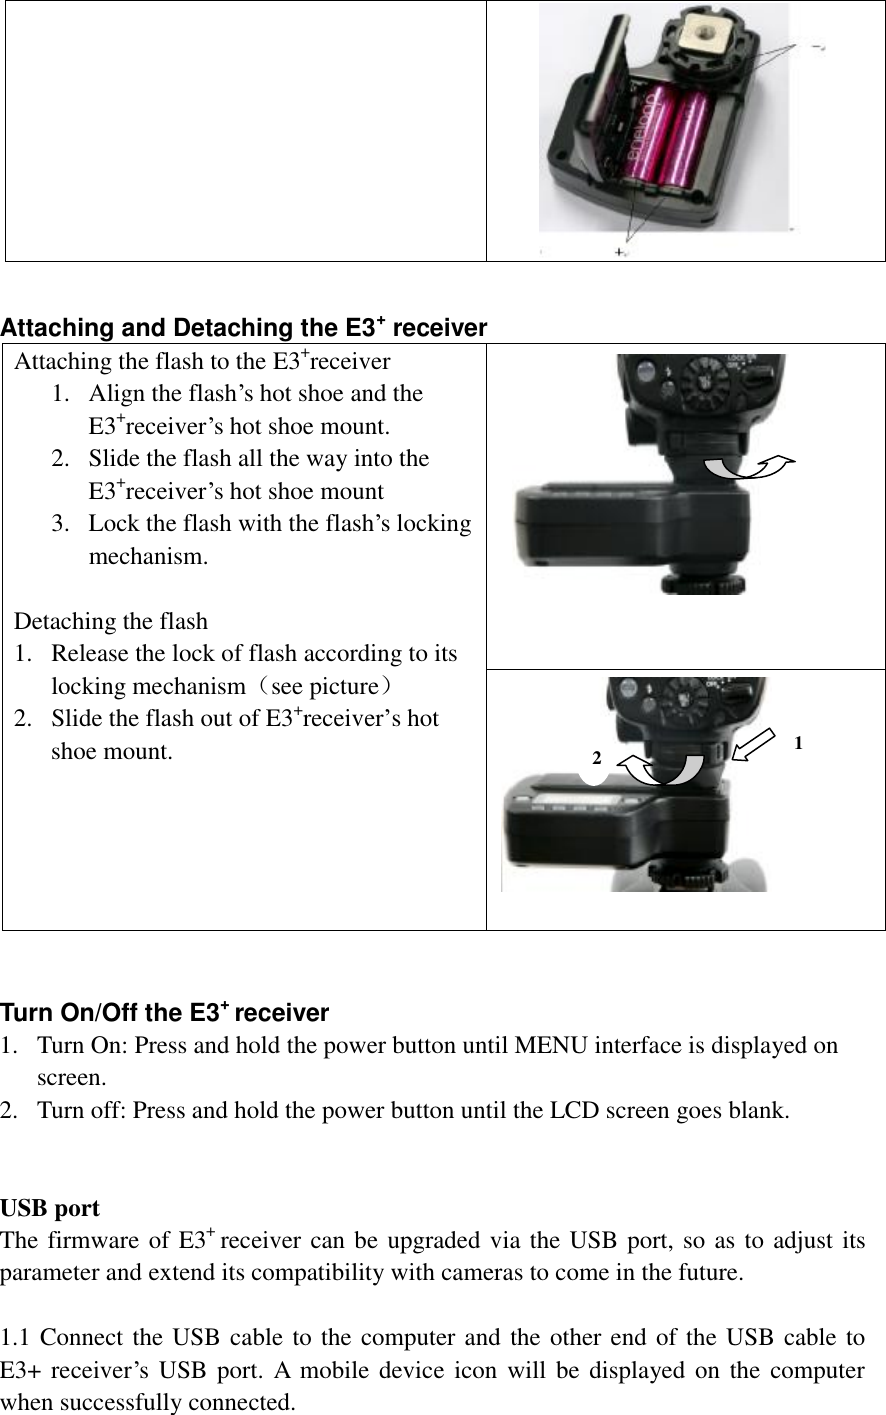   Attaching and Detaching the E3+ receiver Attaching the flash to the E3+receiver 1. Align the flash’s hot shoe and the E3+receiver’s hot shoe mount. 2. Slide the flash all the way into the E3+receiver’s hot shoe mount 3. Lock the flash with the flash’s locking mechanism.   Detaching the flash 1. Release the lock of flash according to its locking mechanism（see picture） 2. Slide the flash out of E3+receiver’s hot shoe mount.              Turn On/Off the E3+ receiver 1. Turn On: Press and hold the power button until MENU interface is displayed on screen.  2. Turn off: Press and hold the power button until the LCD screen goes blank.   USB port The firmware of E3+ receiver can be upgraded via the USB port, so as to adjust its parameter and extend its compatibility with cameras to come in the future.  1.1 Connect the USB cable to the computer and the other end of the USB cable to E3+ receiver’s USB port. A mobile device icon will be displayed on the computer when successfully connected.  1 2 